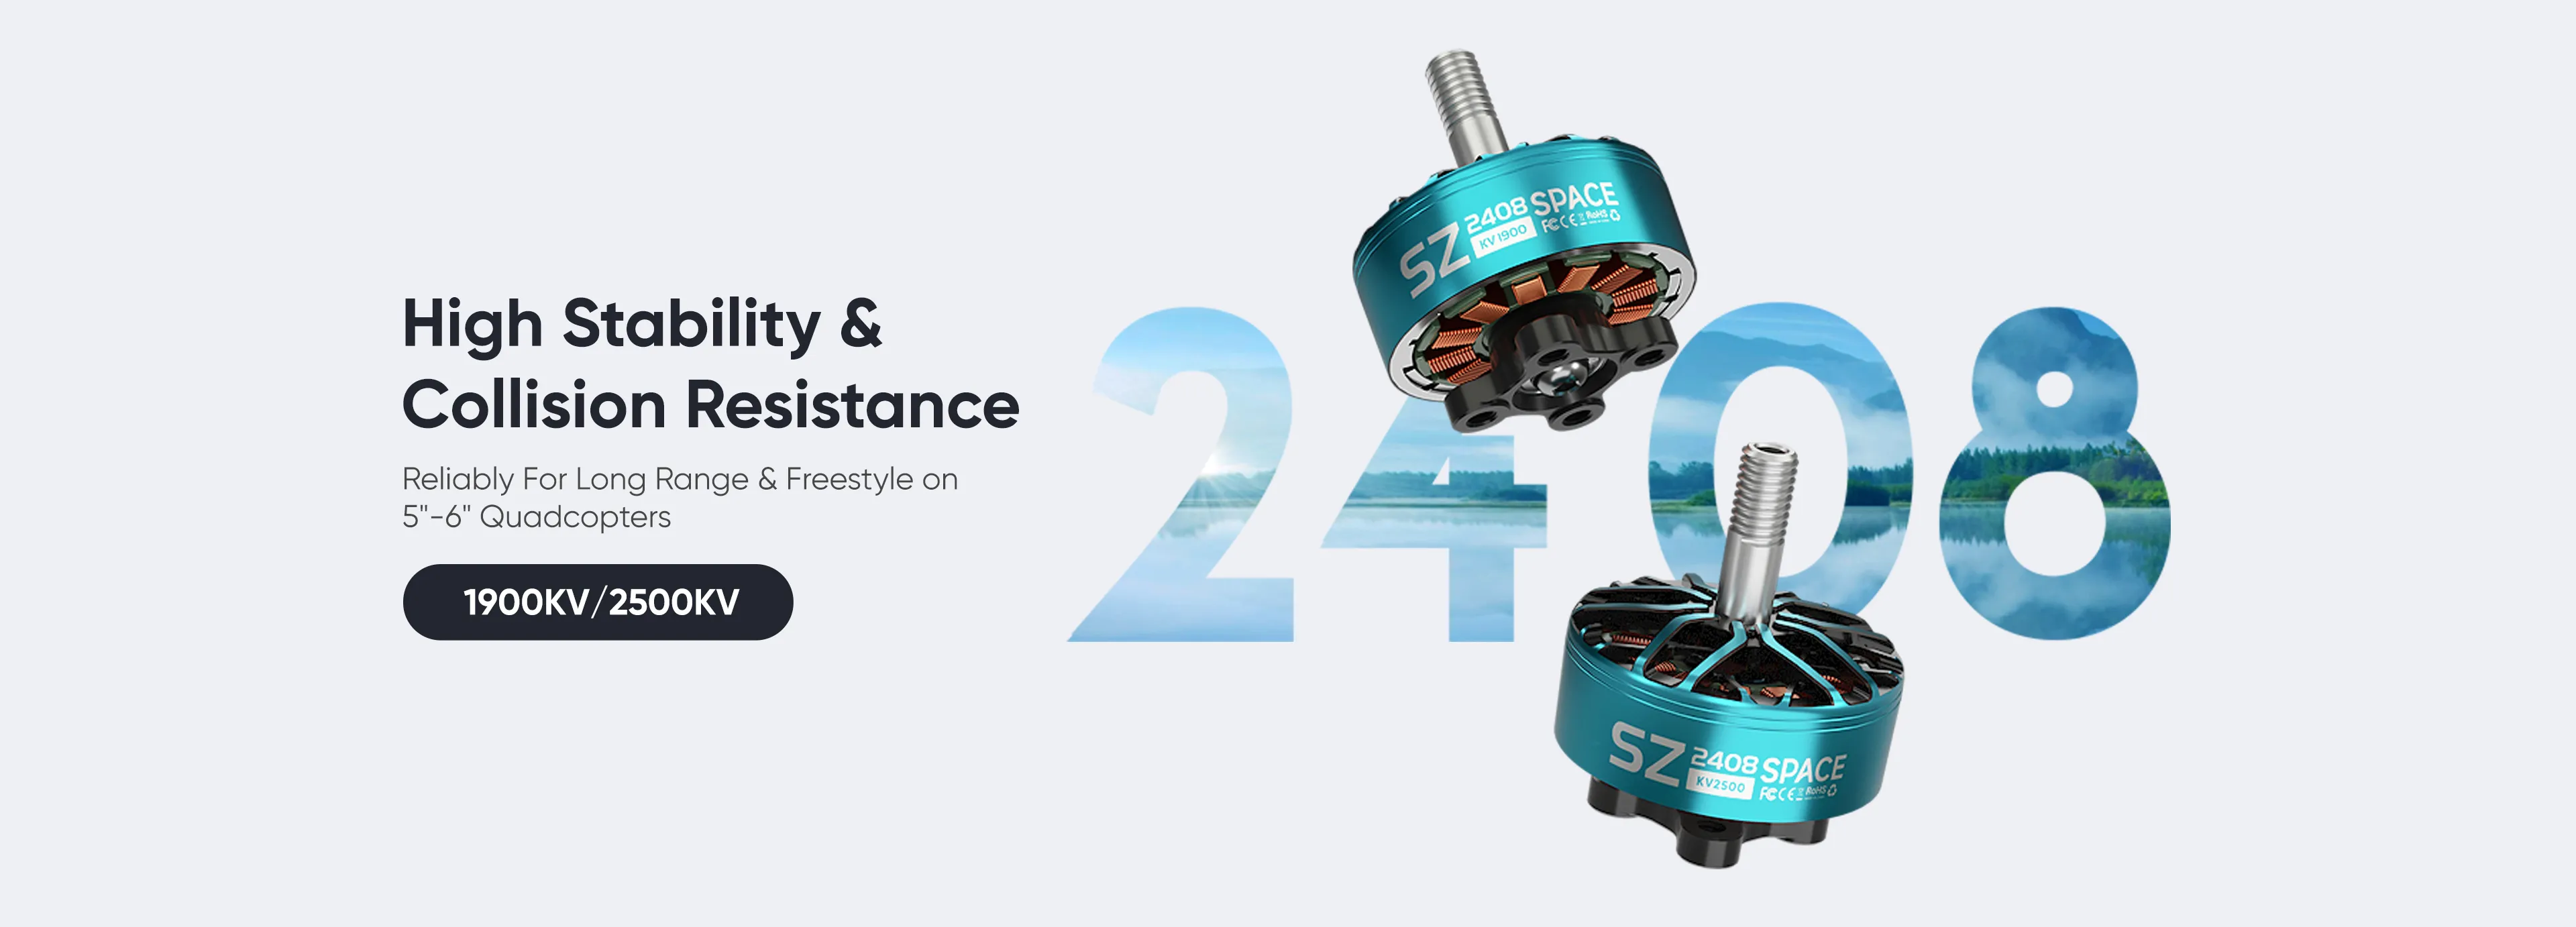 2408 brushless motor features high stability